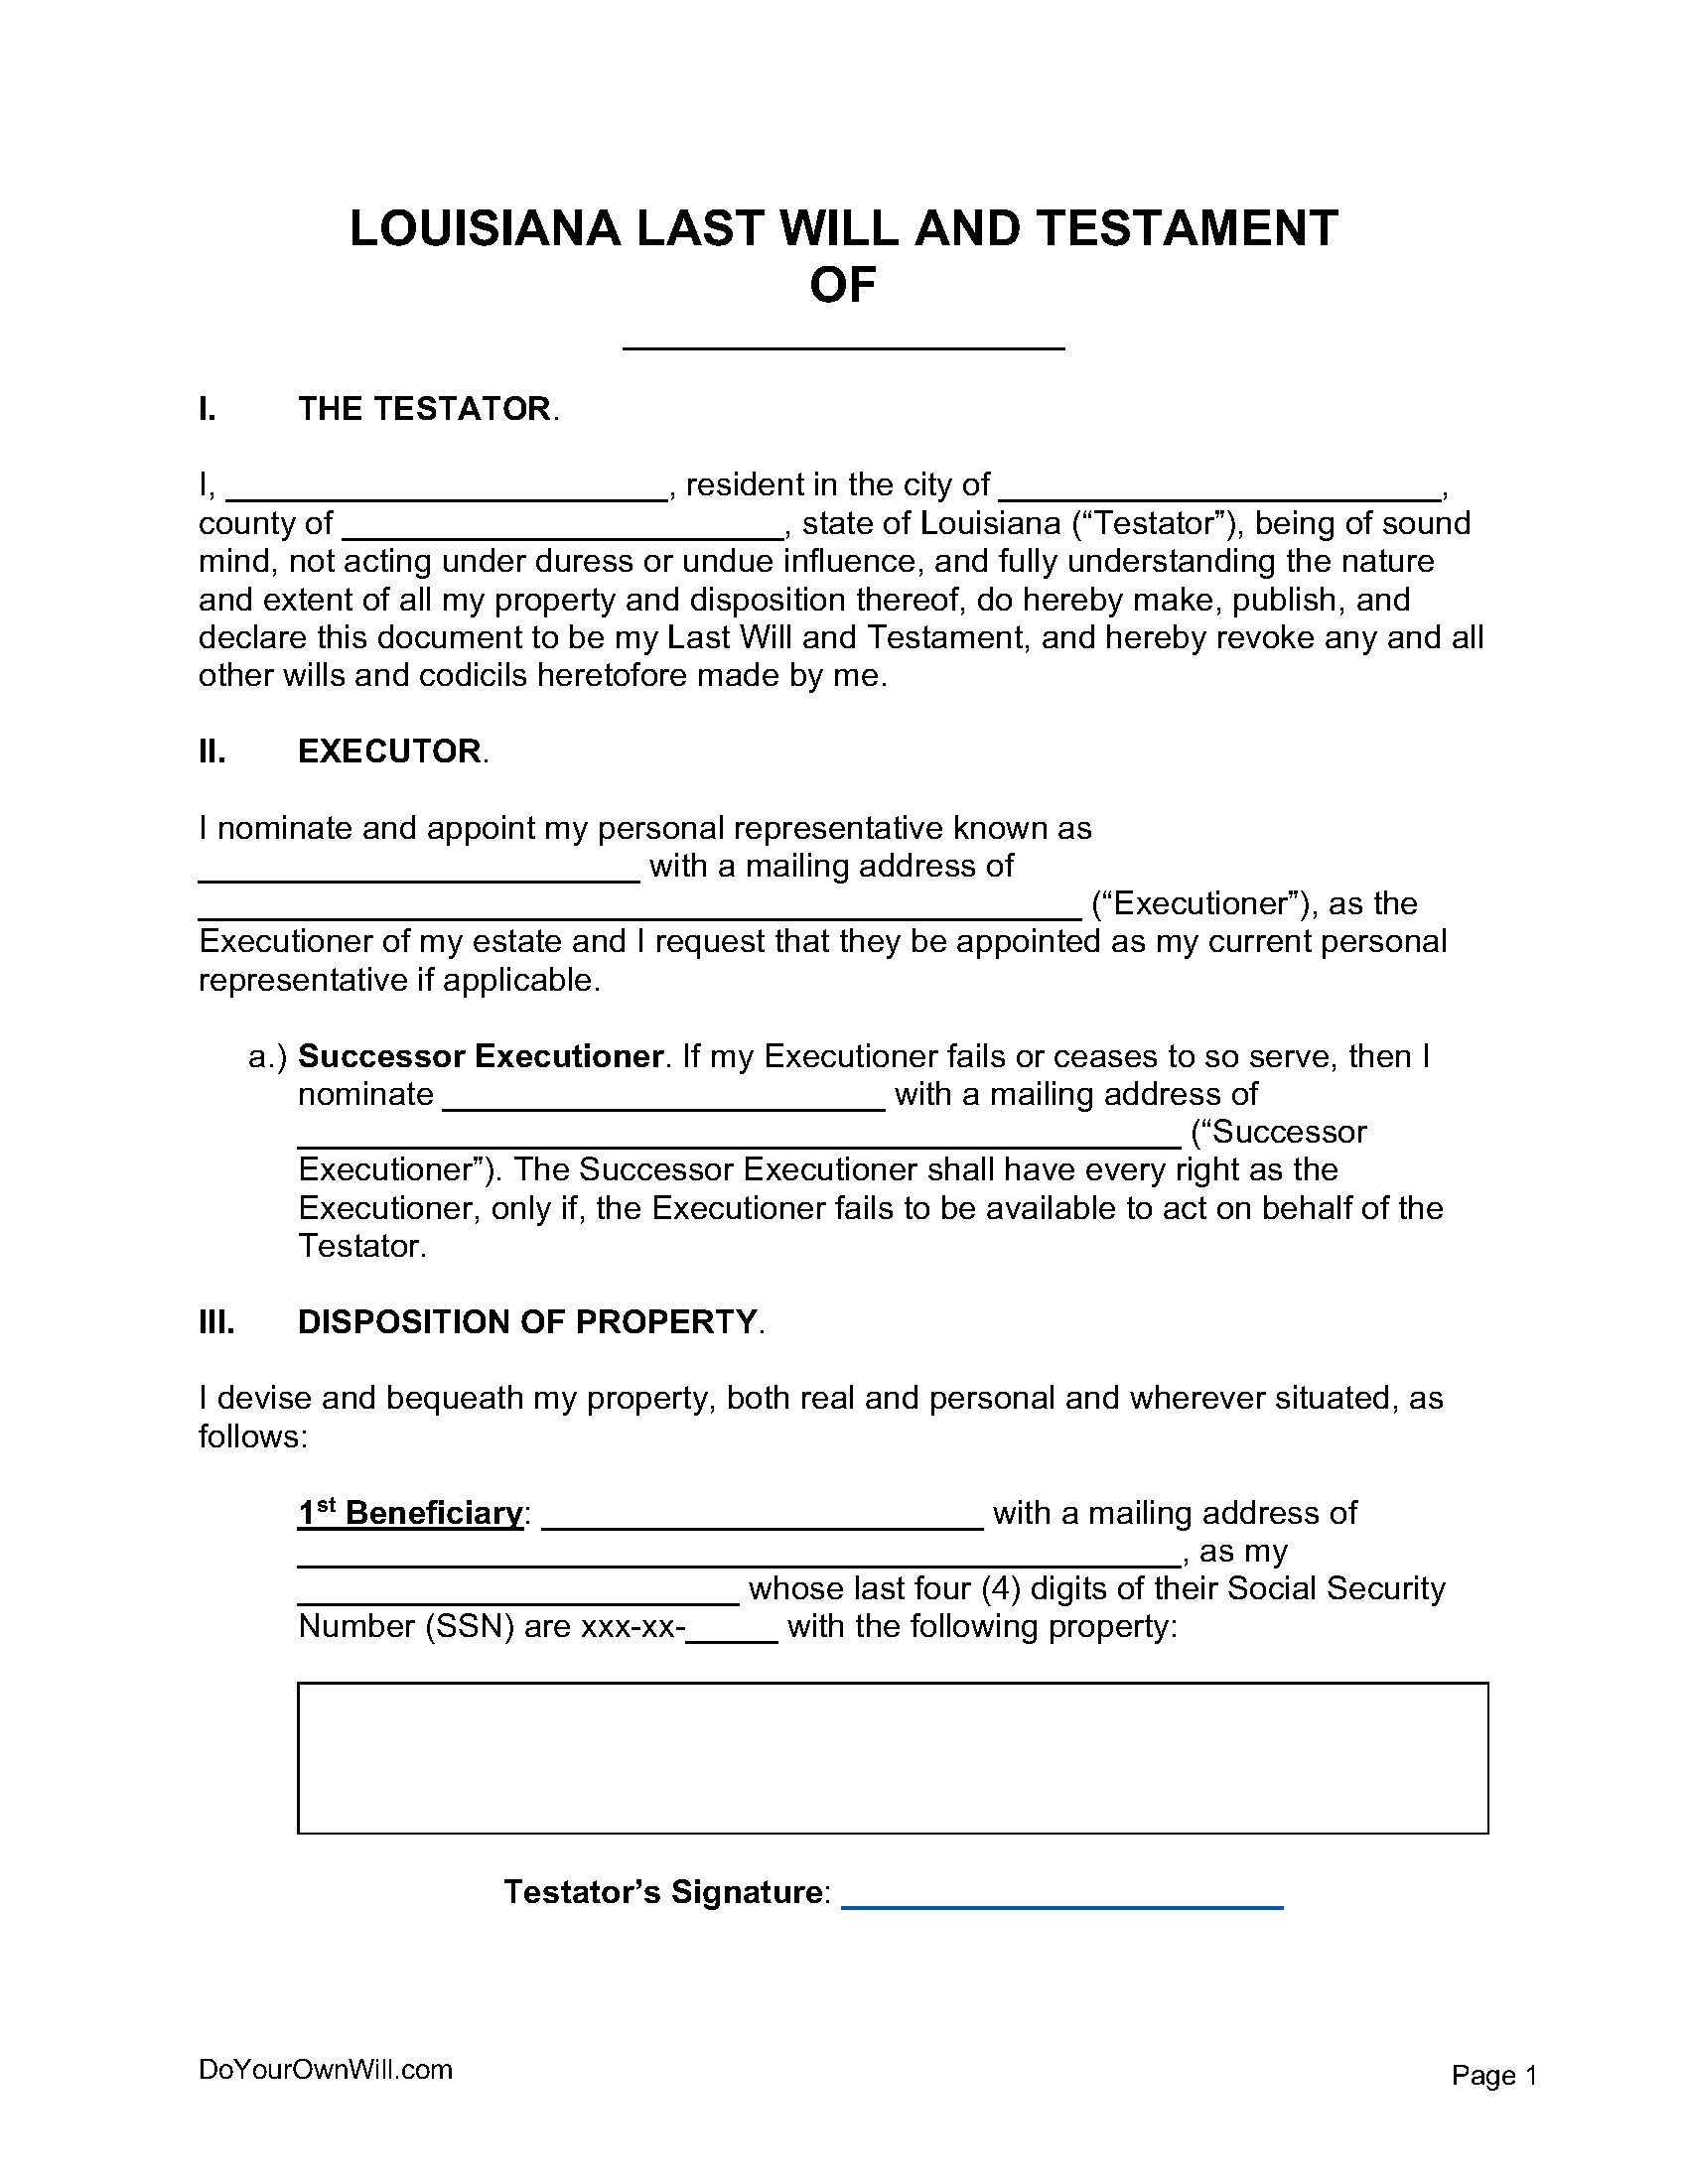 Free Louisiana Last Will and Testament Form PDF WORD ODT